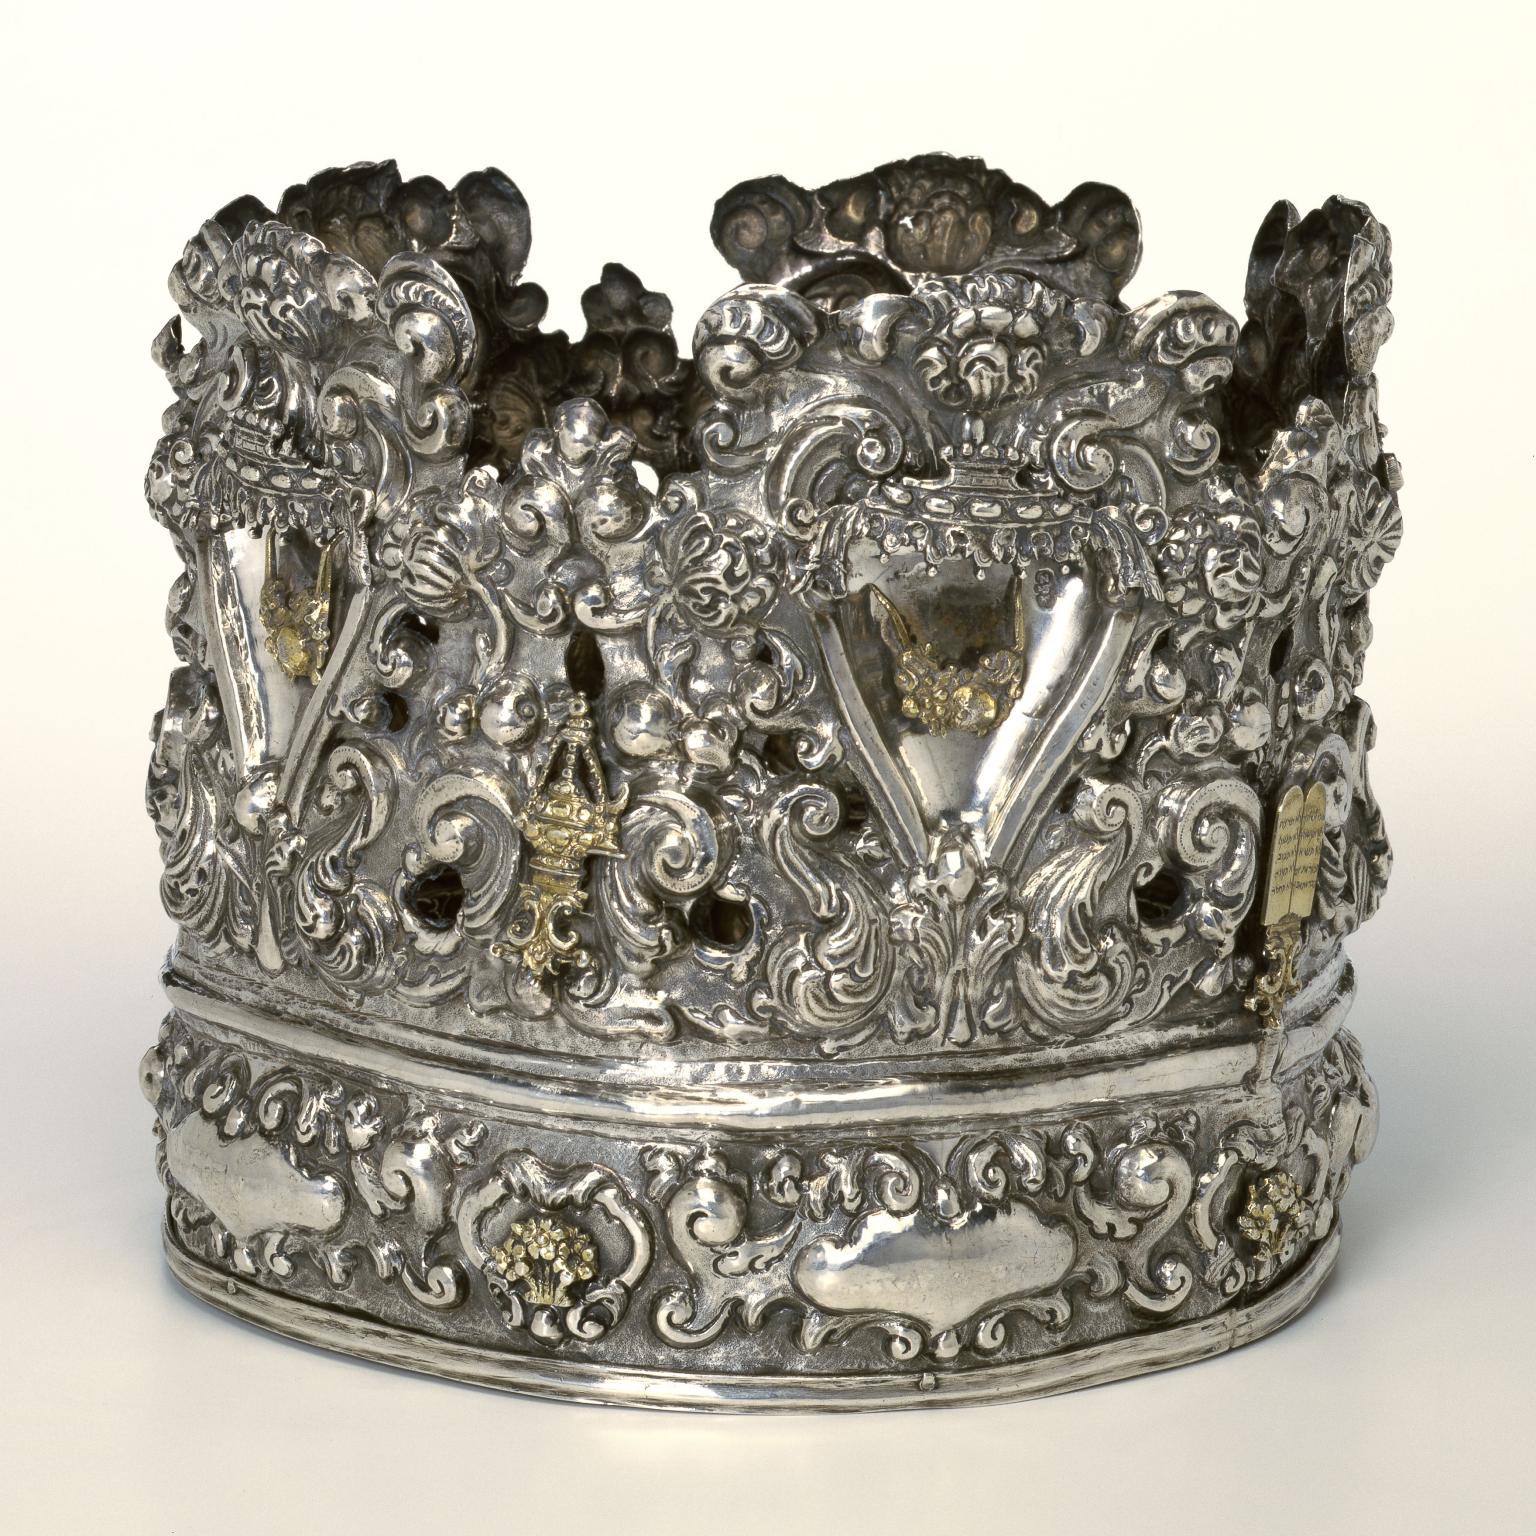 Crown with decorative carvings.